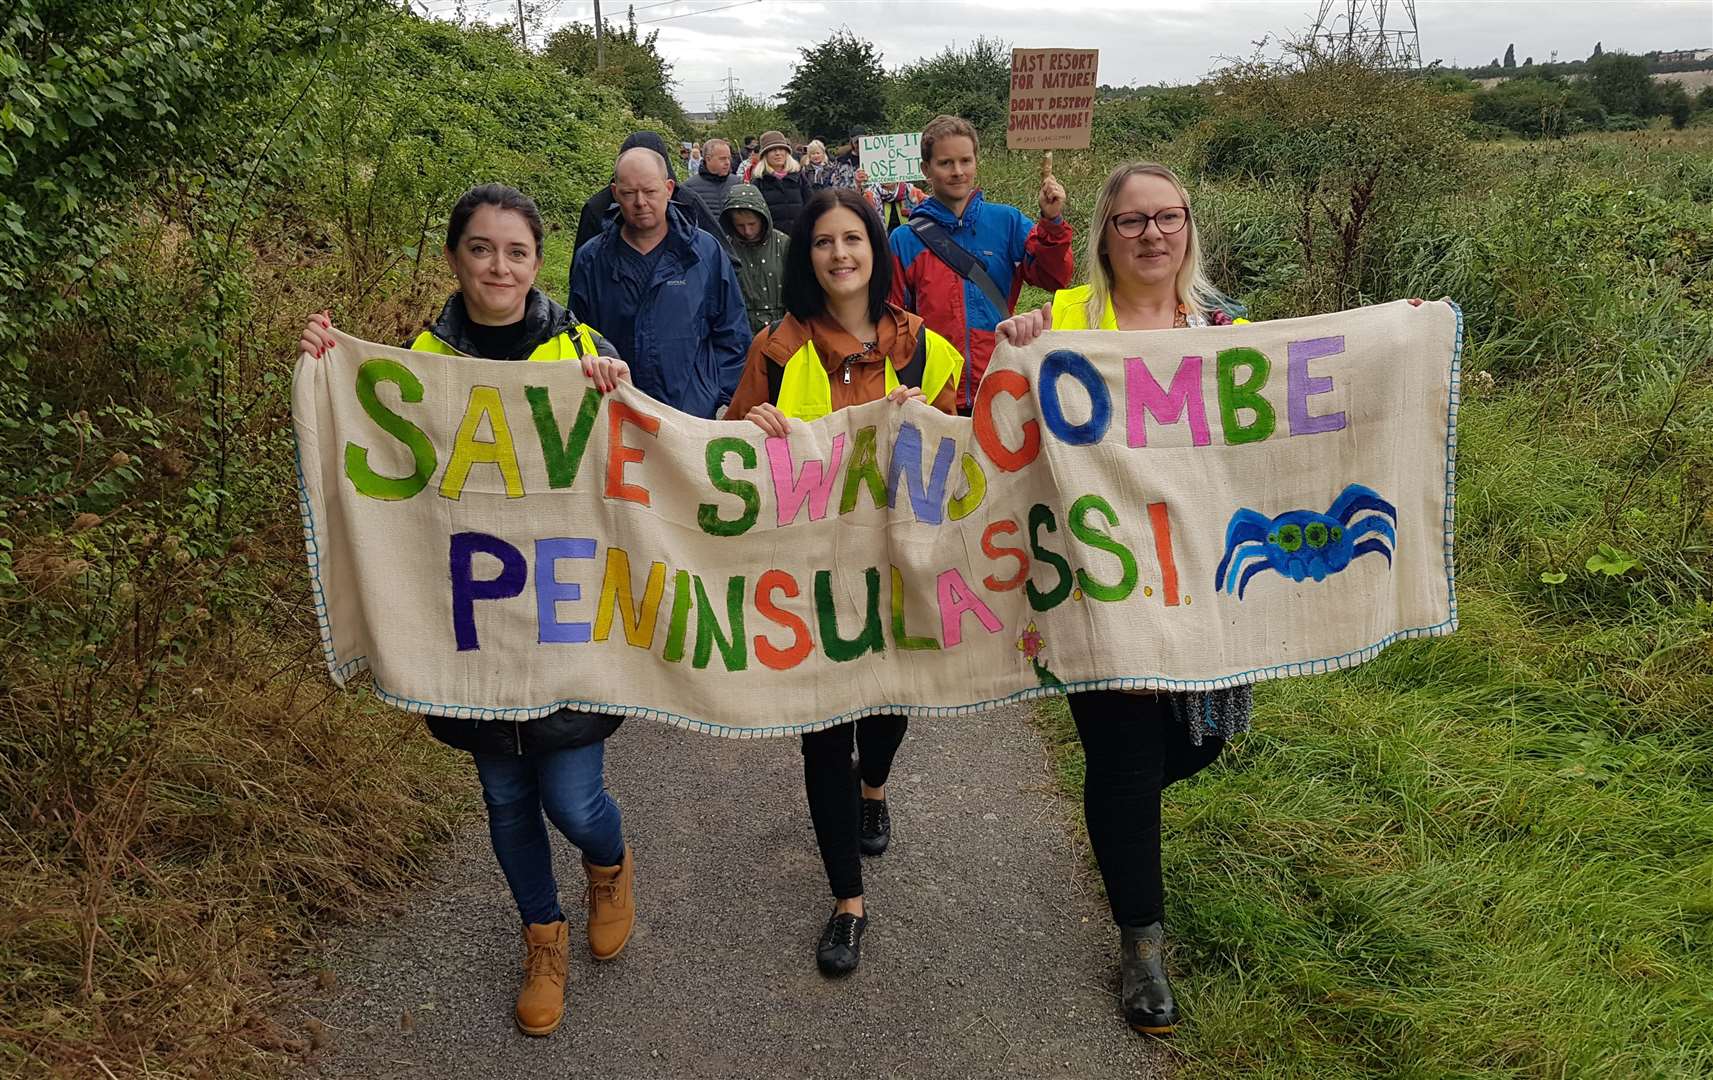 Campaigners protesting against plans to build a theme park on the Swanscombe Marshes. Photo: Save Swanscombe Peninsula